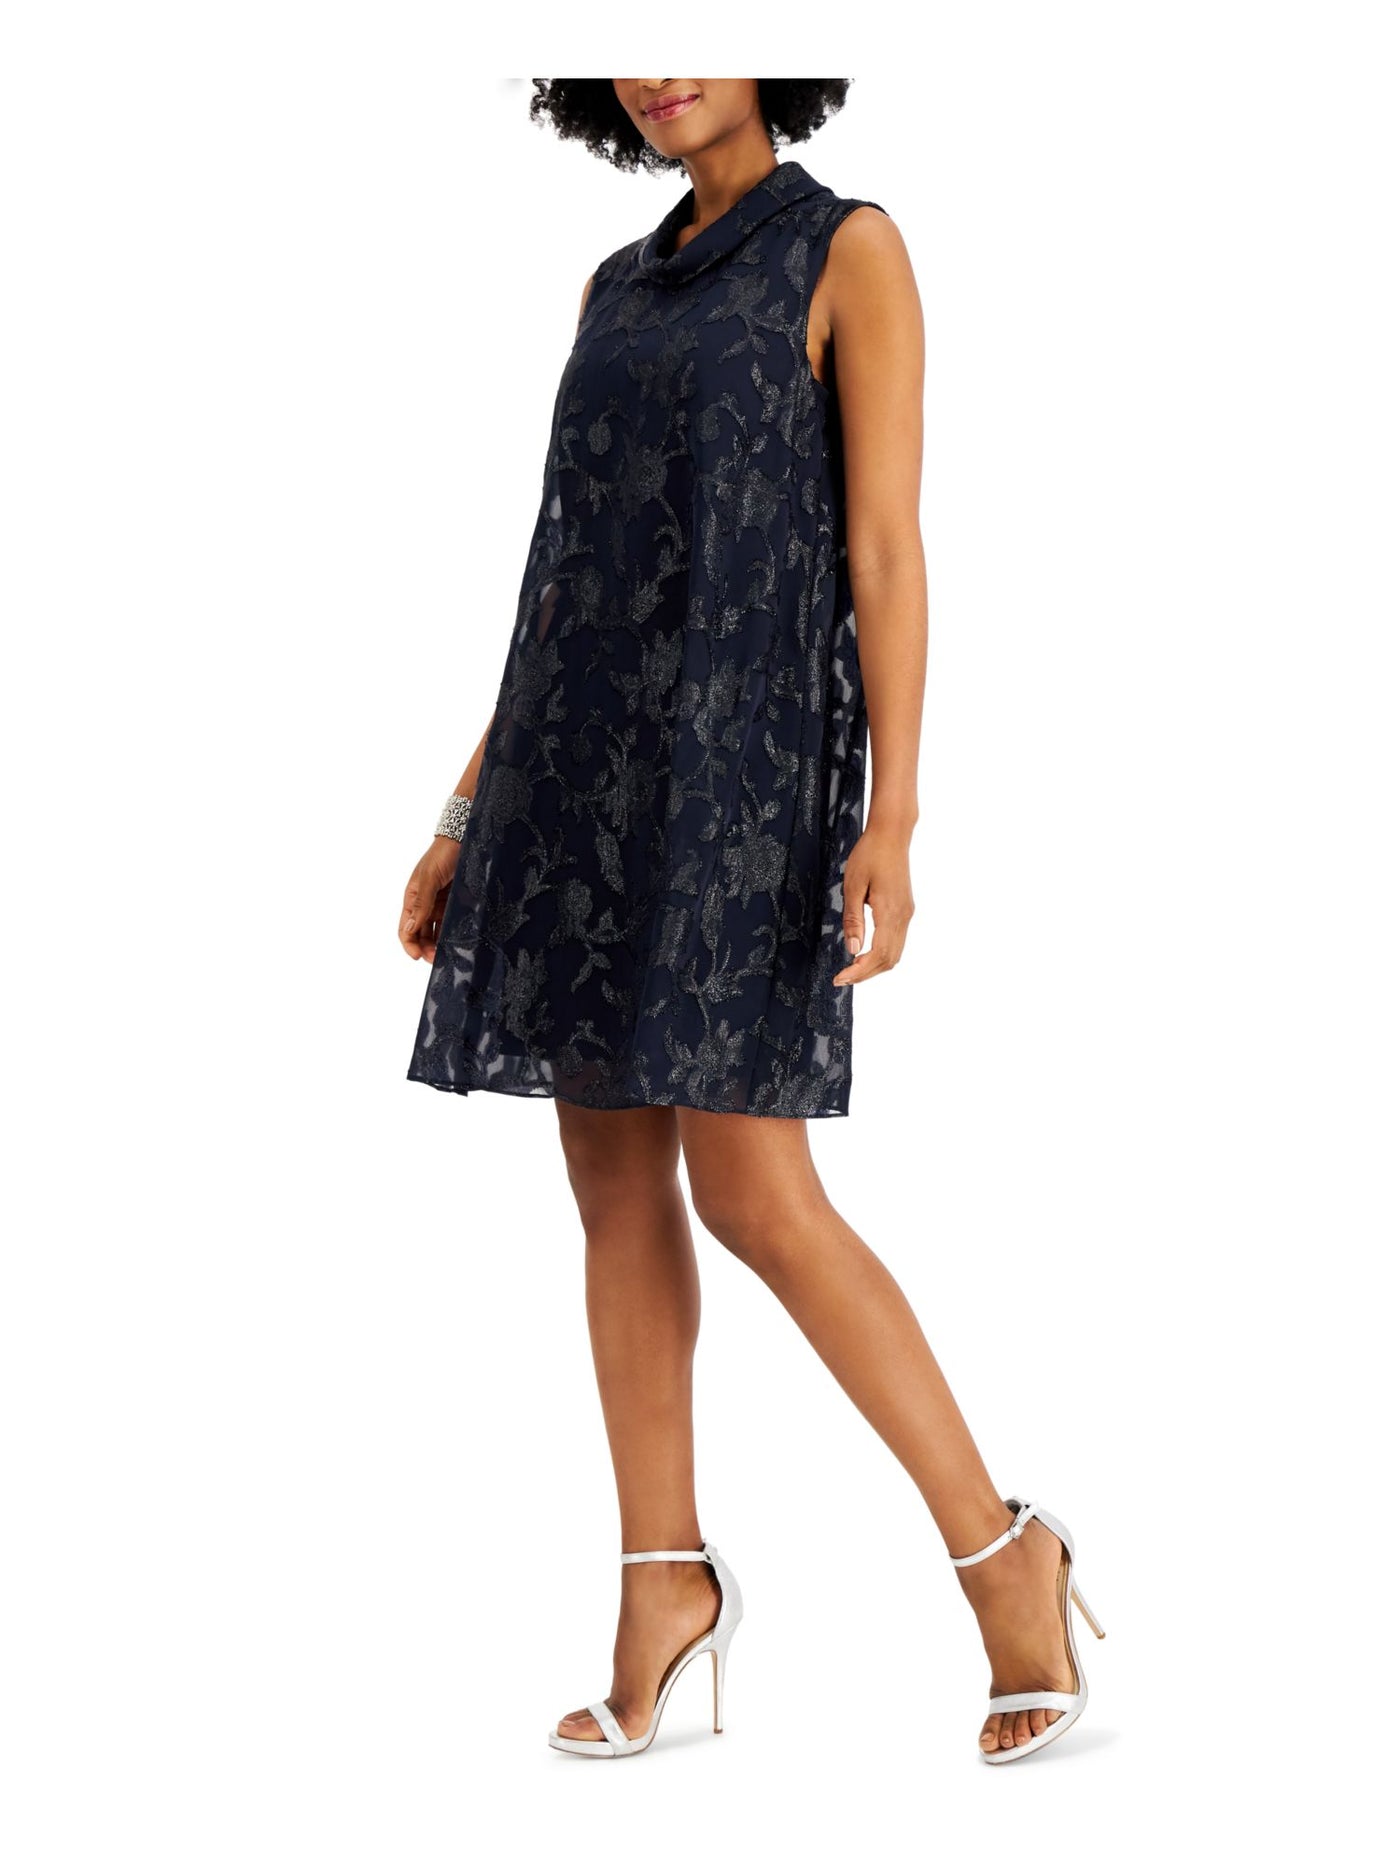 CONNECTED APPAREL Womens Navy Floral Sleeveless Above The Knee Cocktail Shift Dress 12